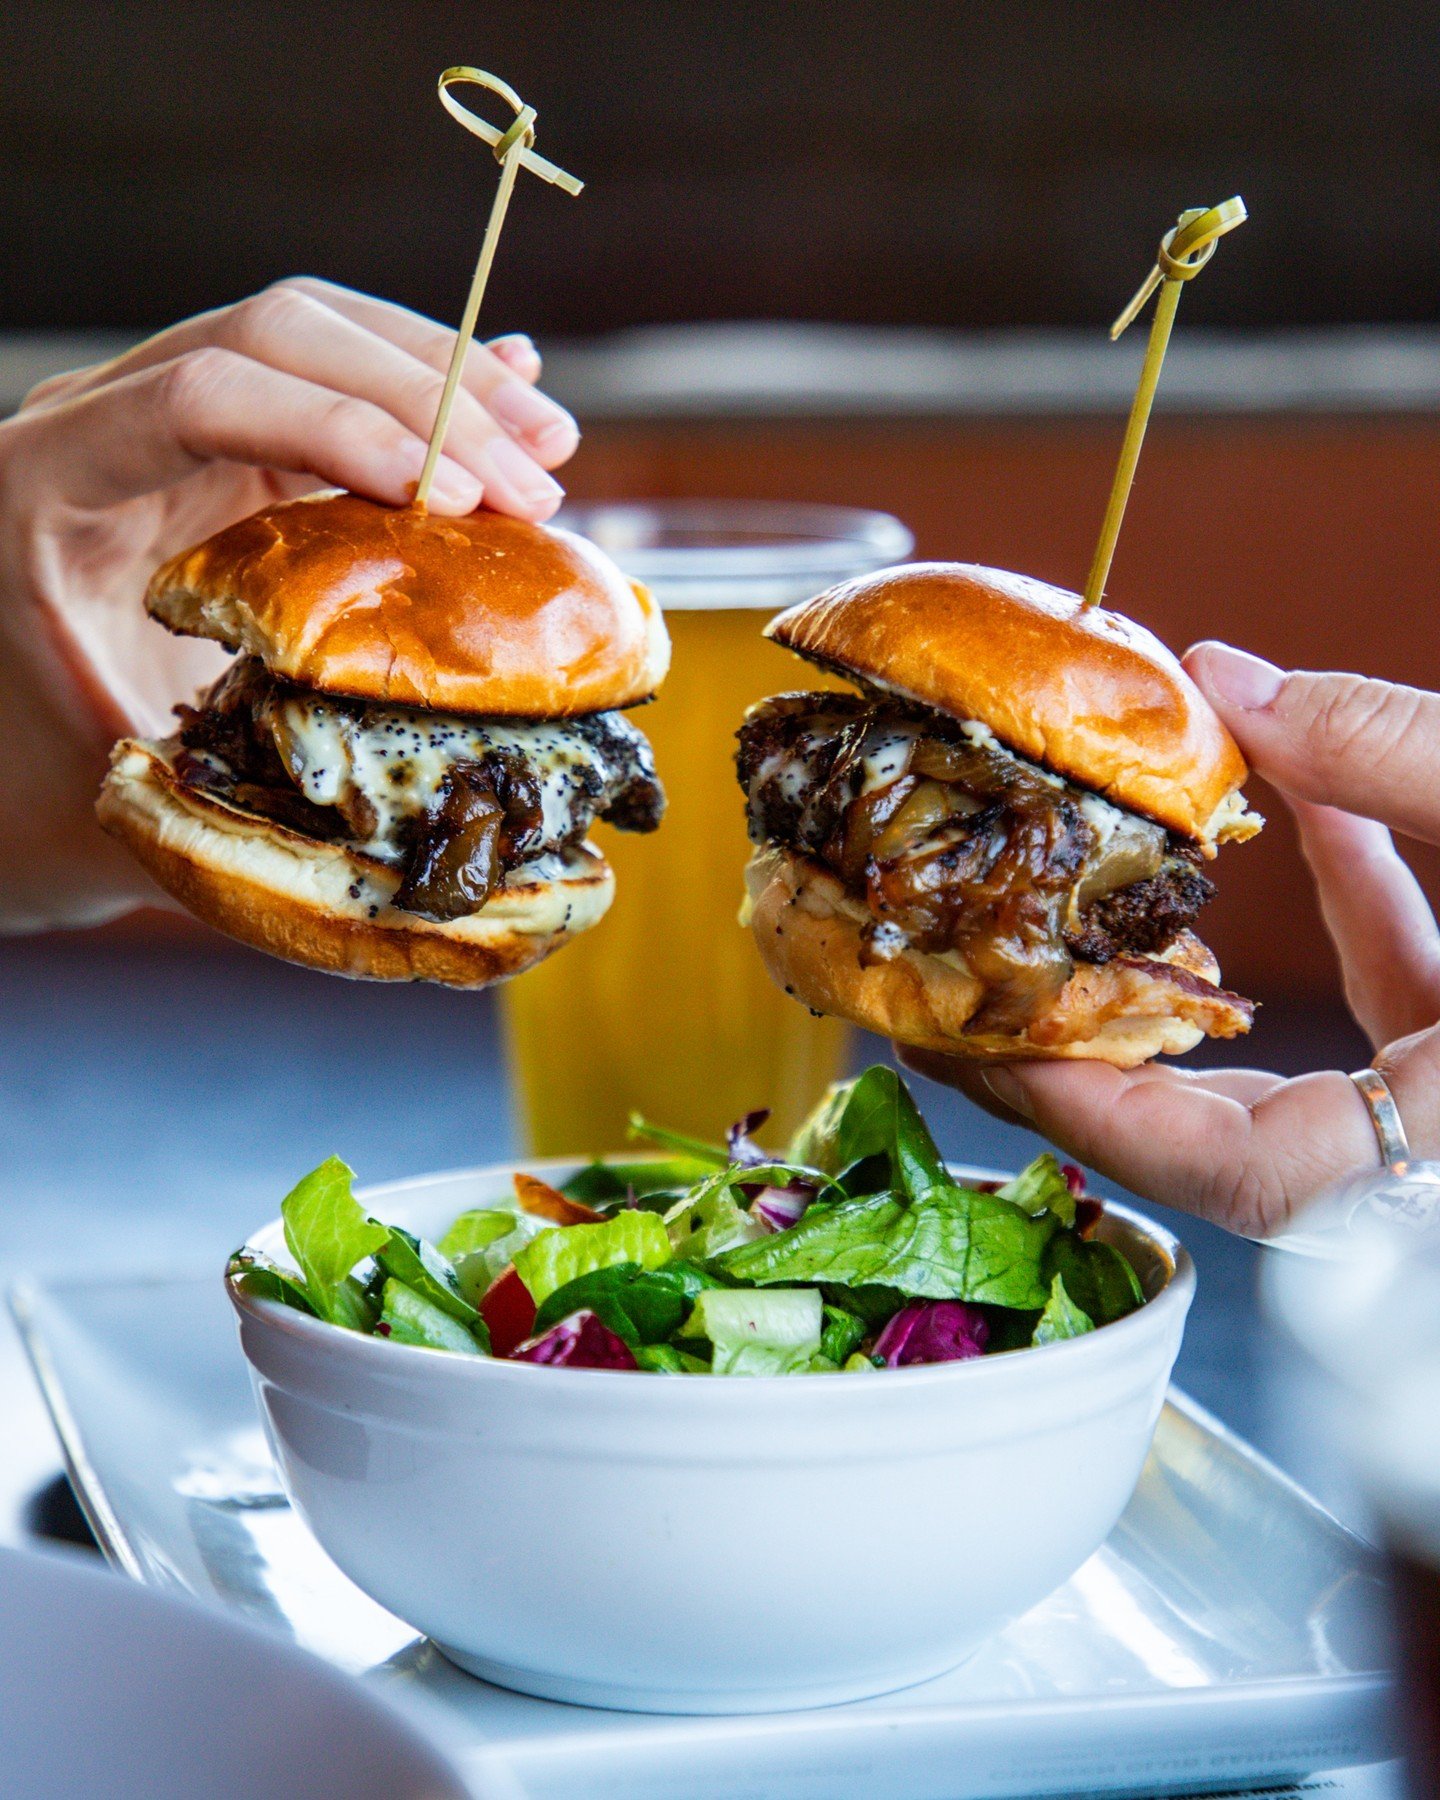 𝘚𝘭𝘪𝘥𝘦 into the weekend with Wagyu Sliders &mdash; stacked with Bacon, Caramelized Onions, Blue Cheese and Wagyu Beef locally sourced from @rangercattle! 🌱🍔

#Do512Eats #AustinFoodies #AustinEater #24Diner #AustinLife #RangerCattle #AustinEats 